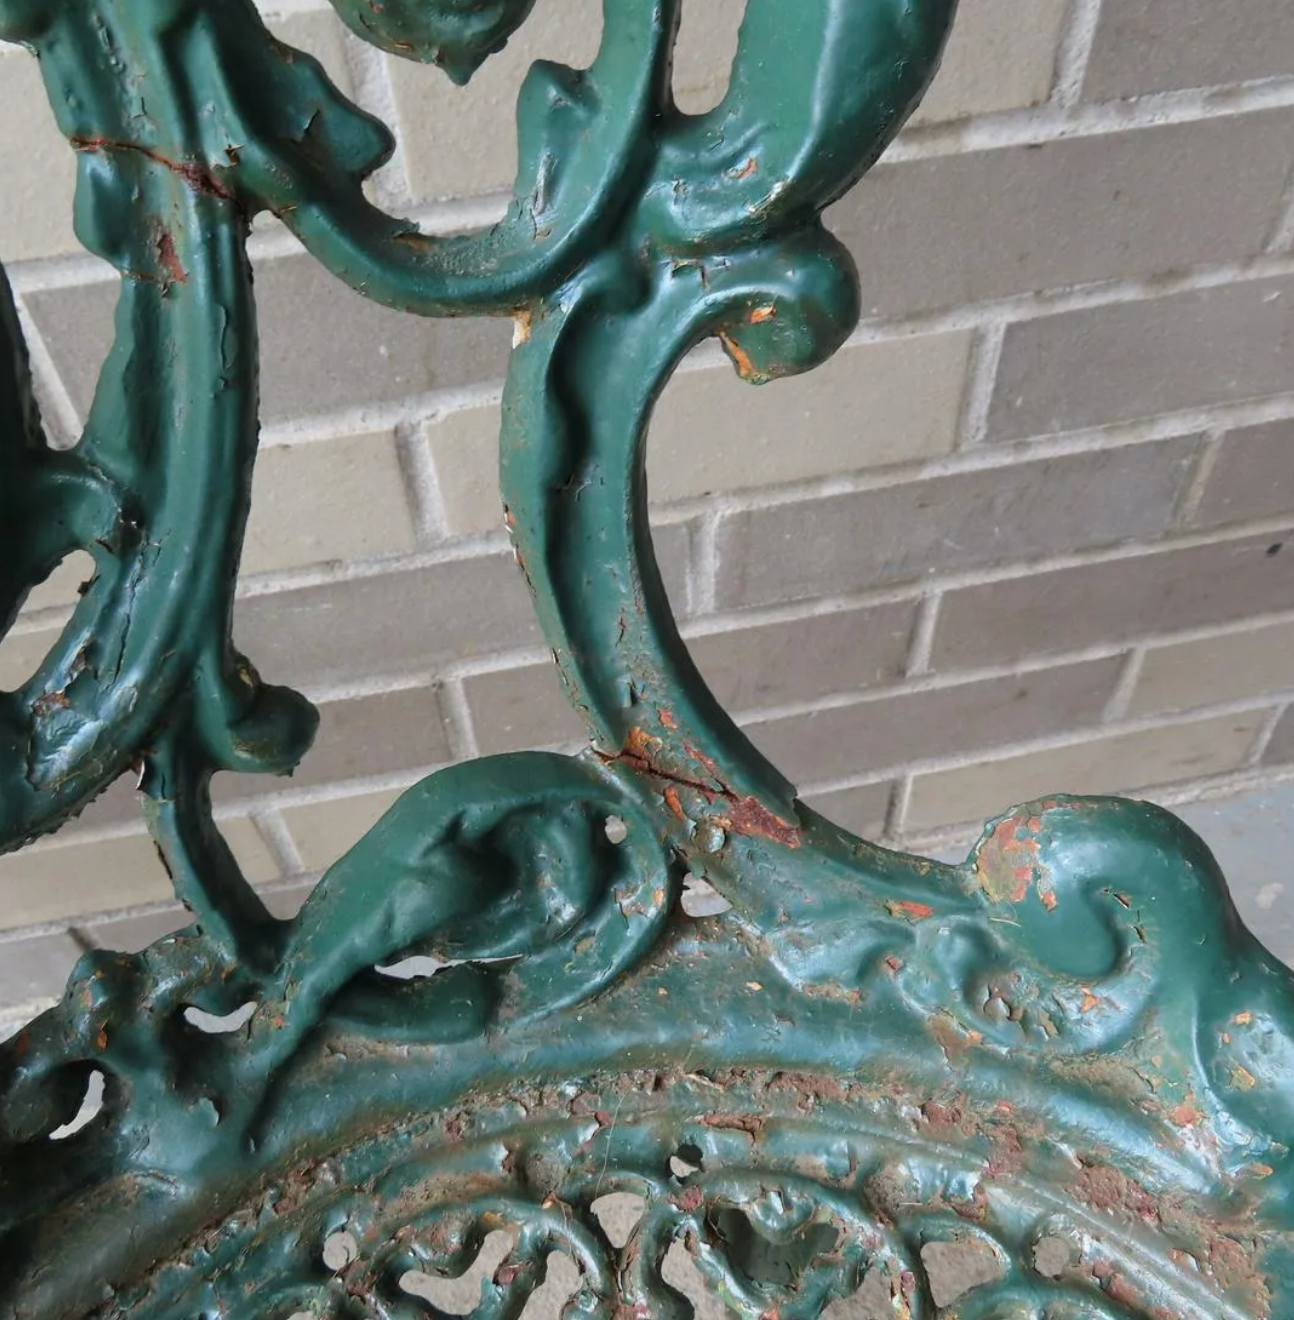 Pair of Fancy Cast Iron Garden Chairs w/ Pierced Back and Seats